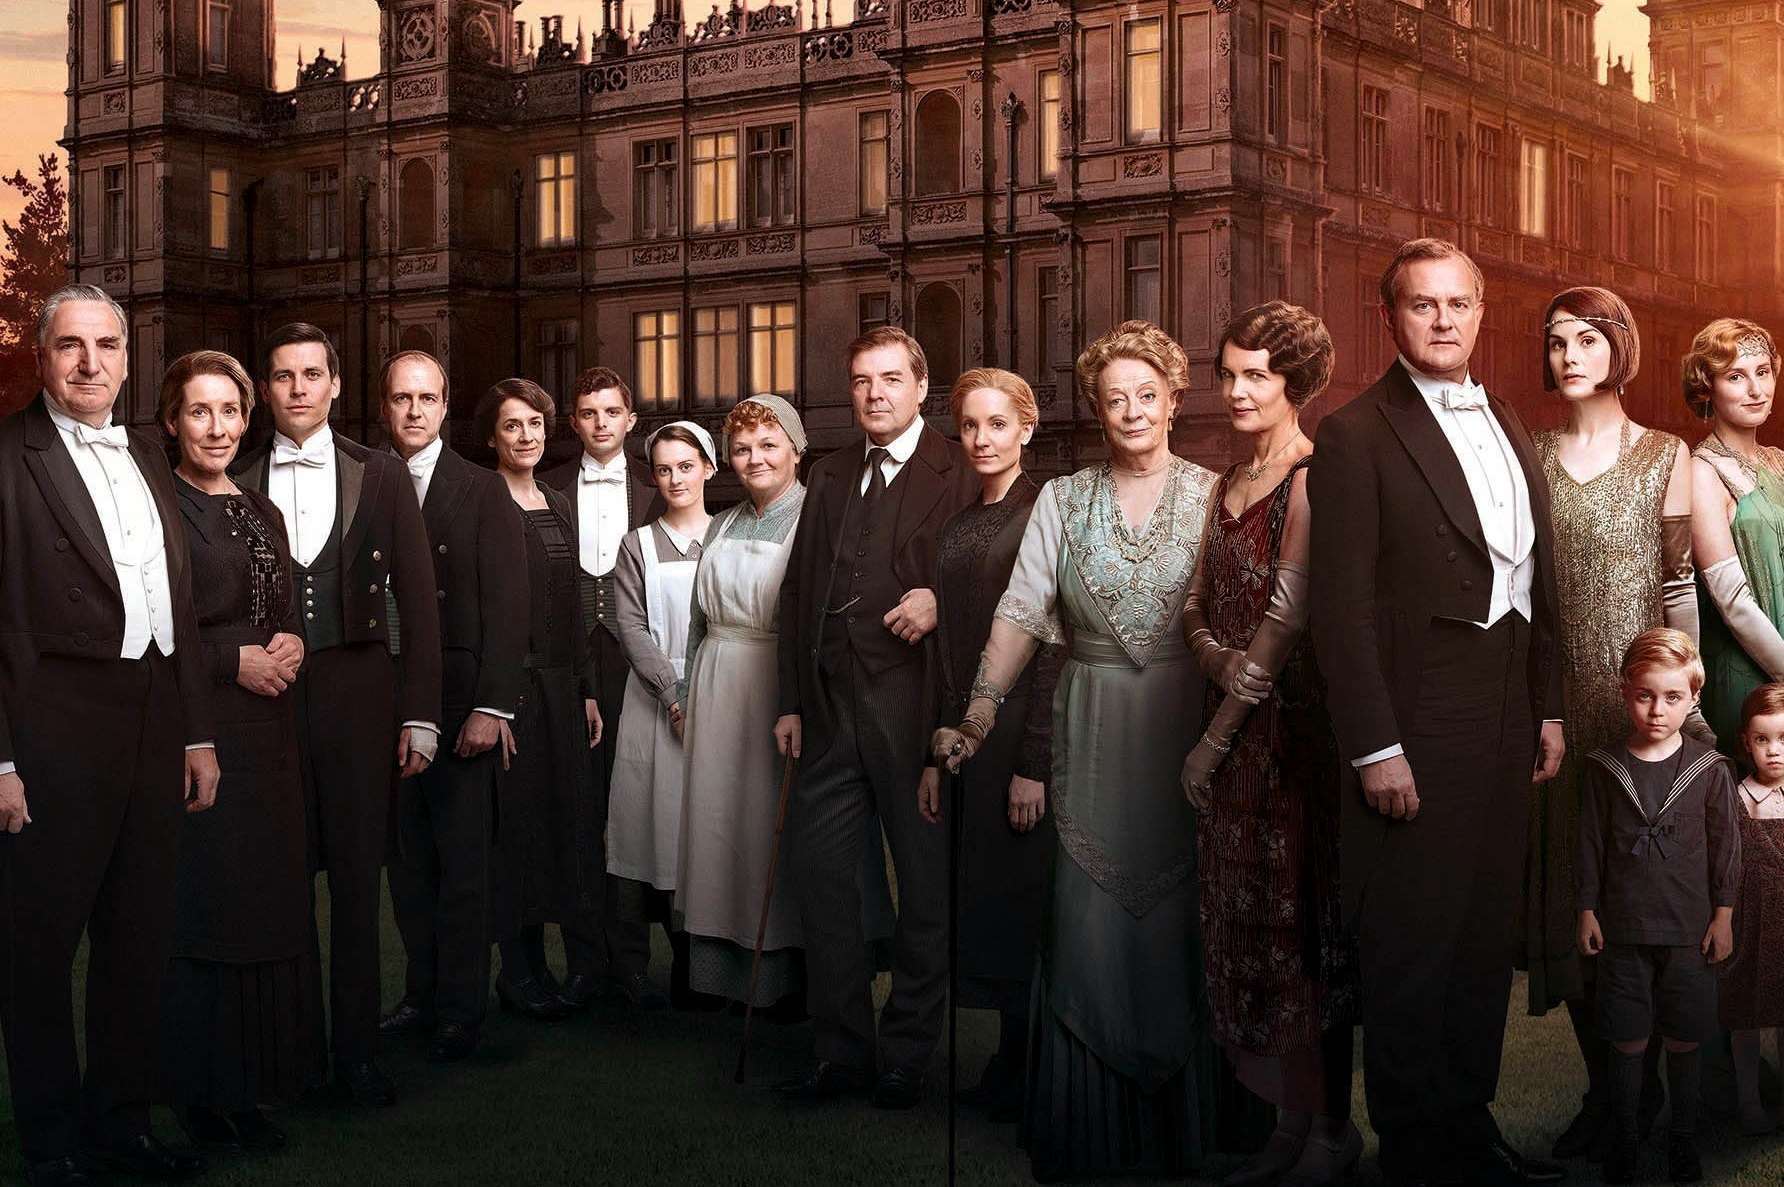 The Alliance says that implementing a 20mph speed limit would be like going back in time to the Downton Abbey era.